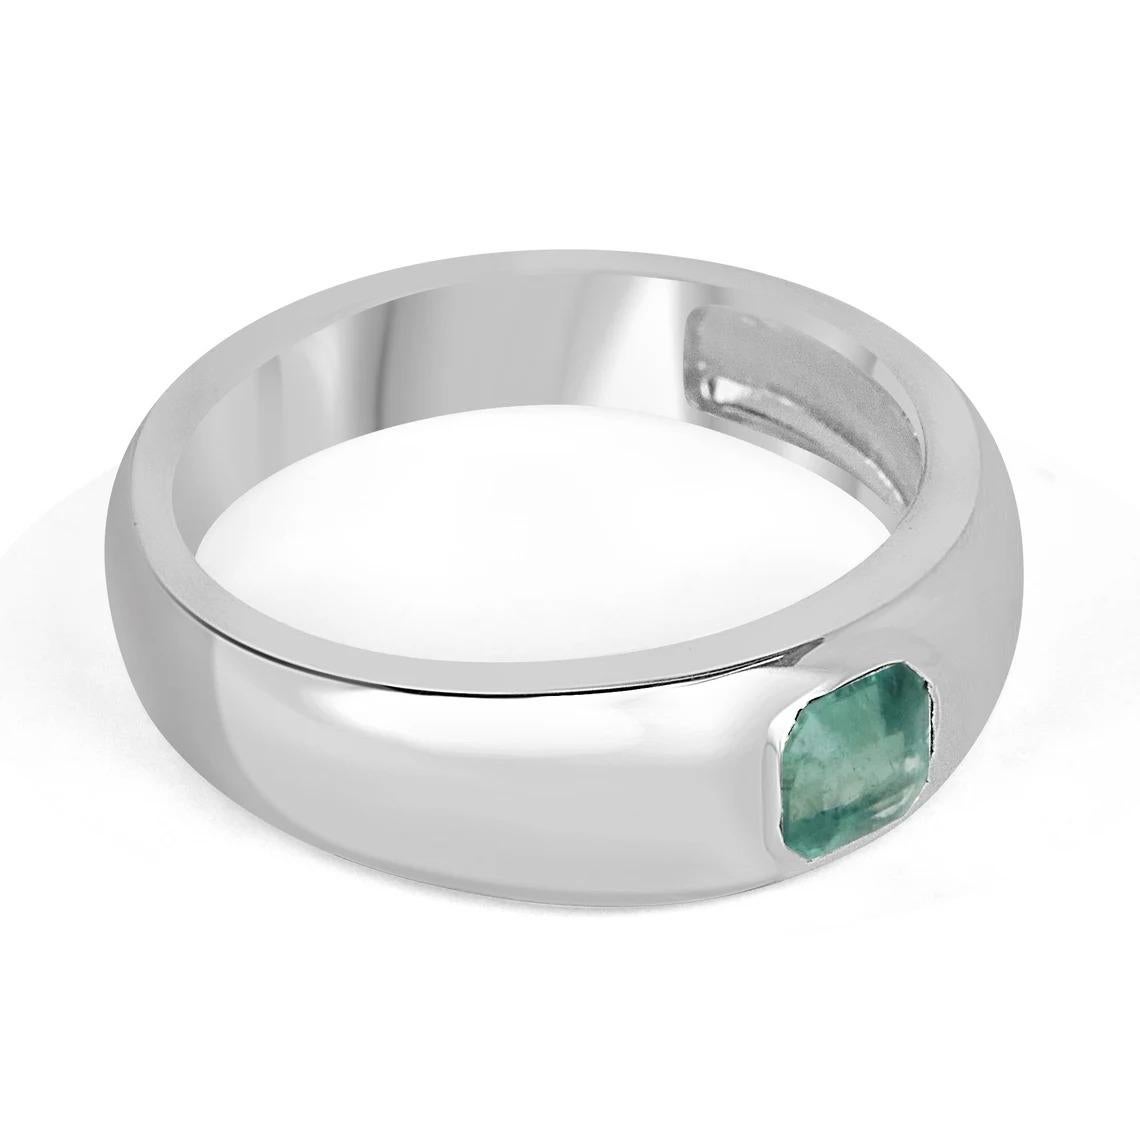 A lovely solitaire emerald ring; featuring an asscher-cut emerald from the origin of Zambia. The gemstone showcases a gorgeous light-medium green color with very good clarity and luster. Set in a secure solitaire bezel setting crafted in sterling